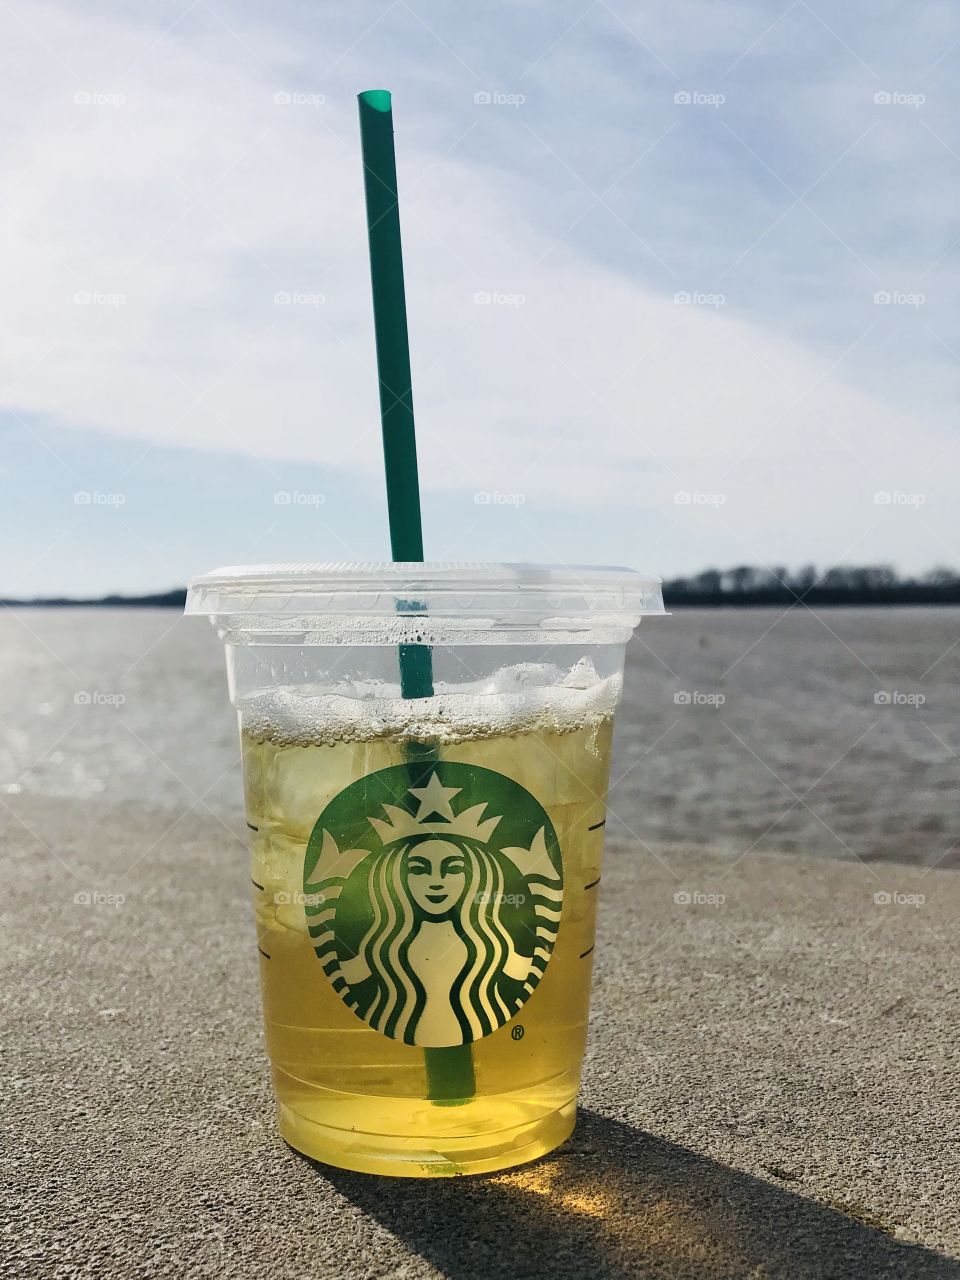 River front and Starbucks 